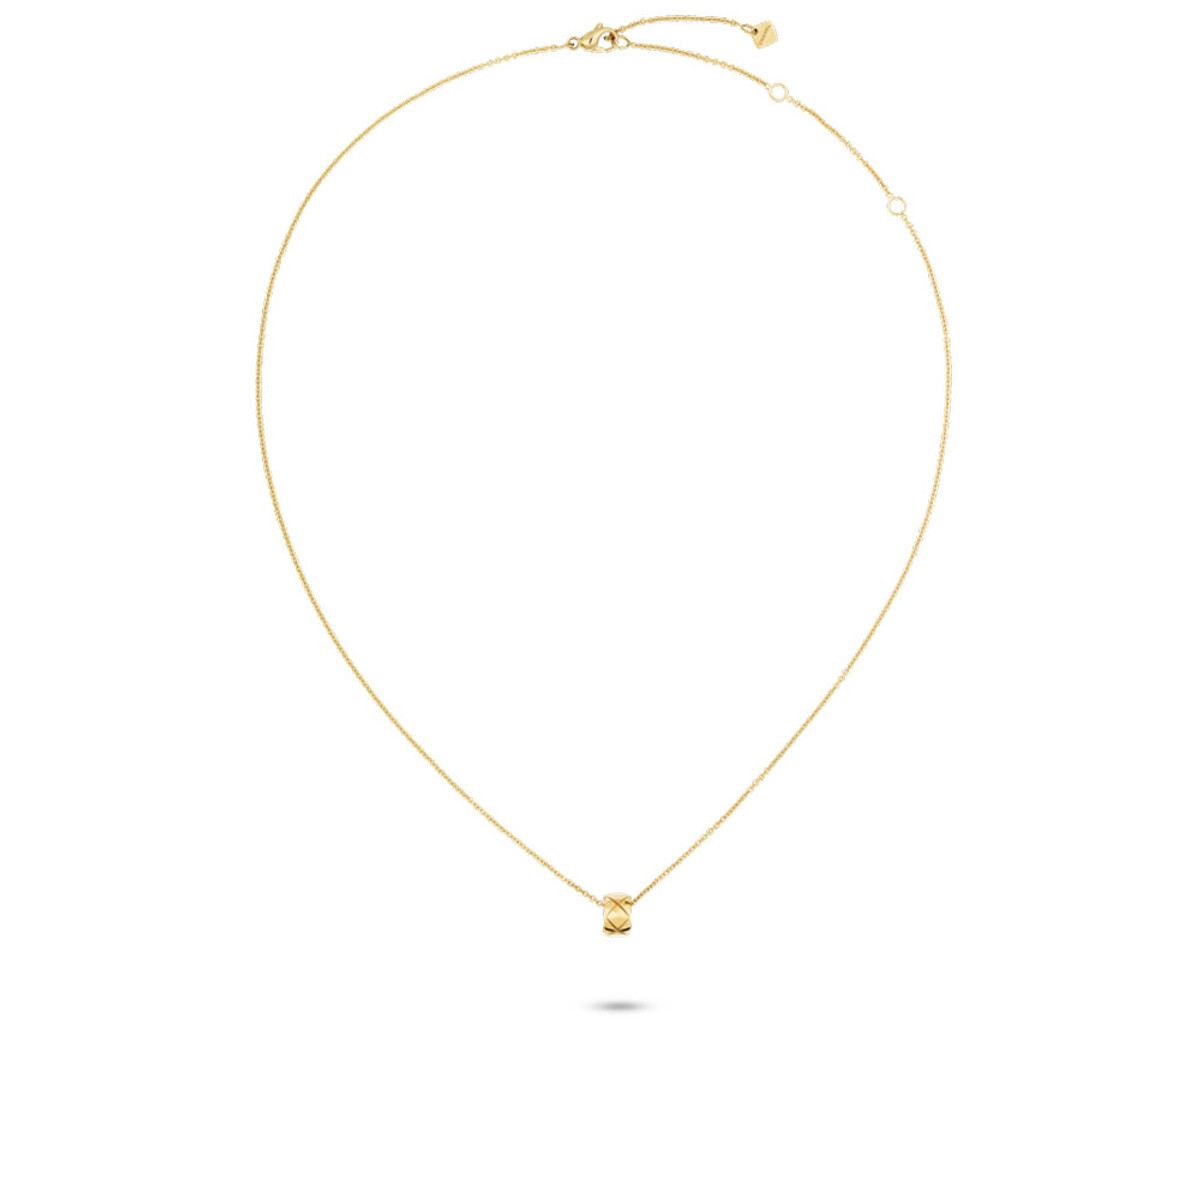 CHANEL COCO CRUSH Necklace-48858 Product Image